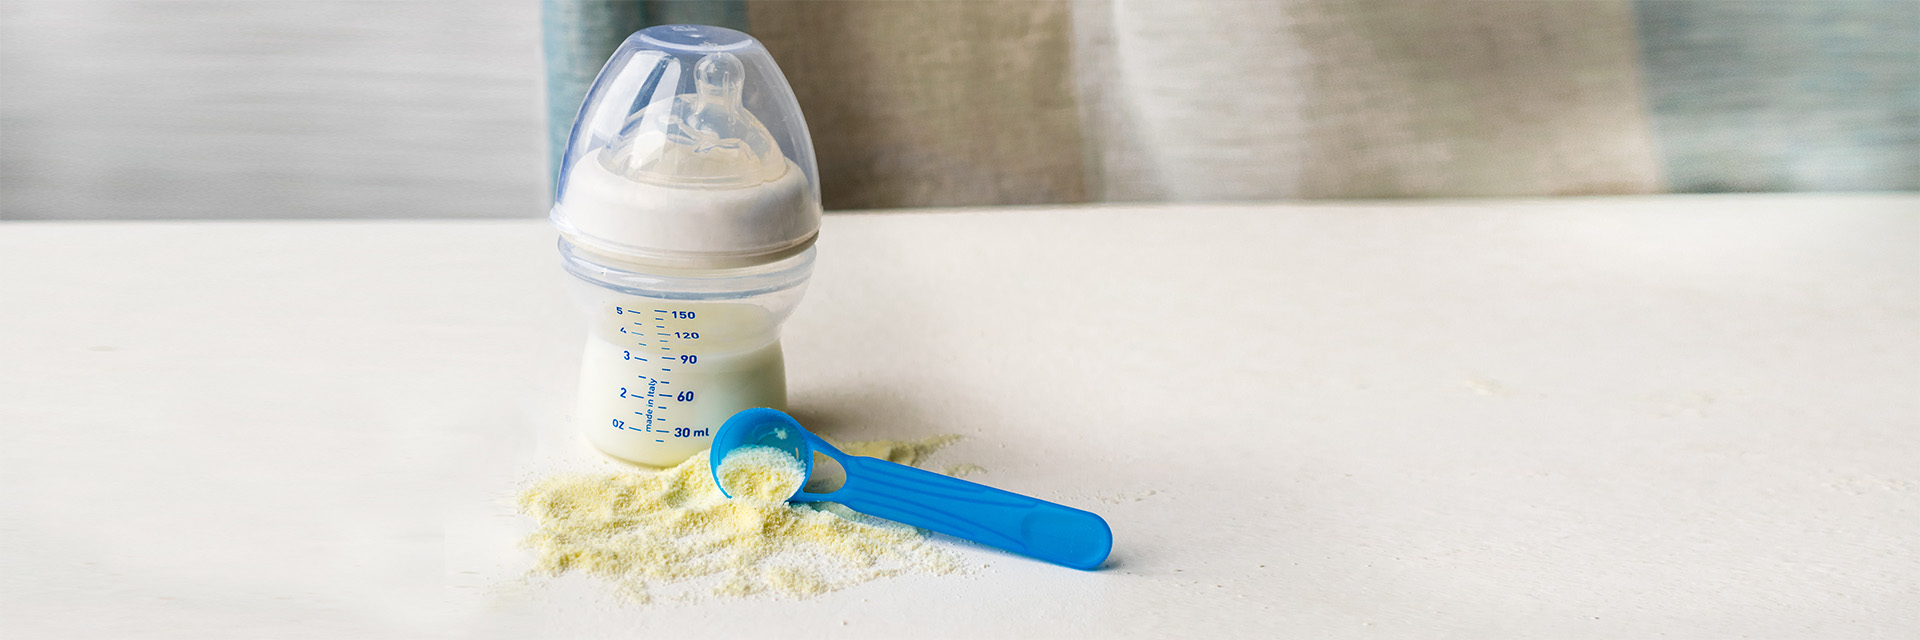 Baby bottle and formula on counter